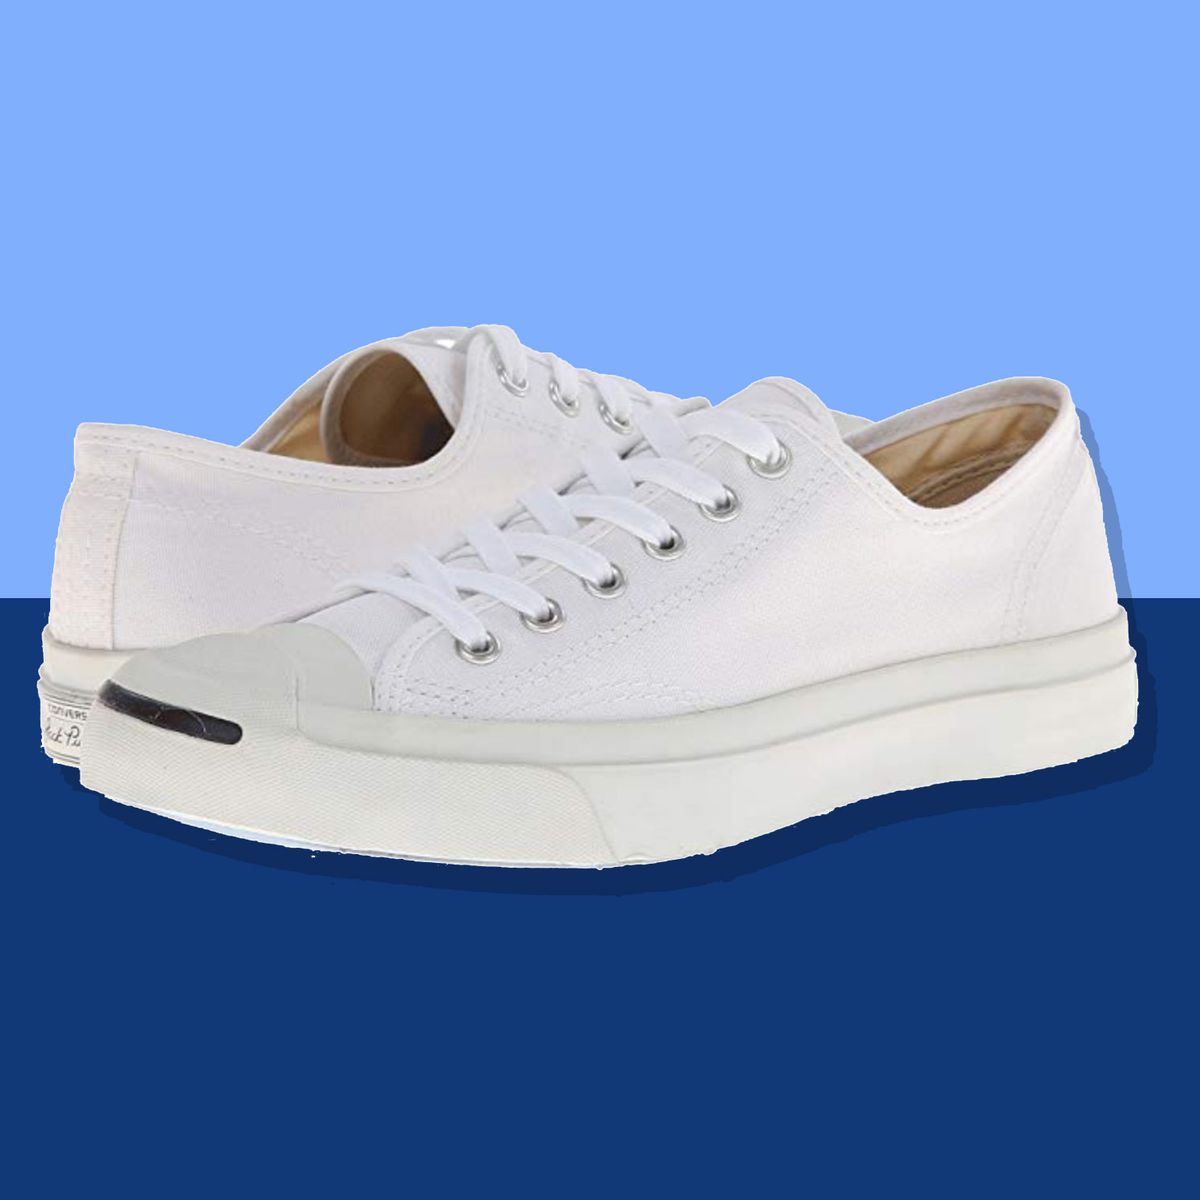 converse jack purcell zappos